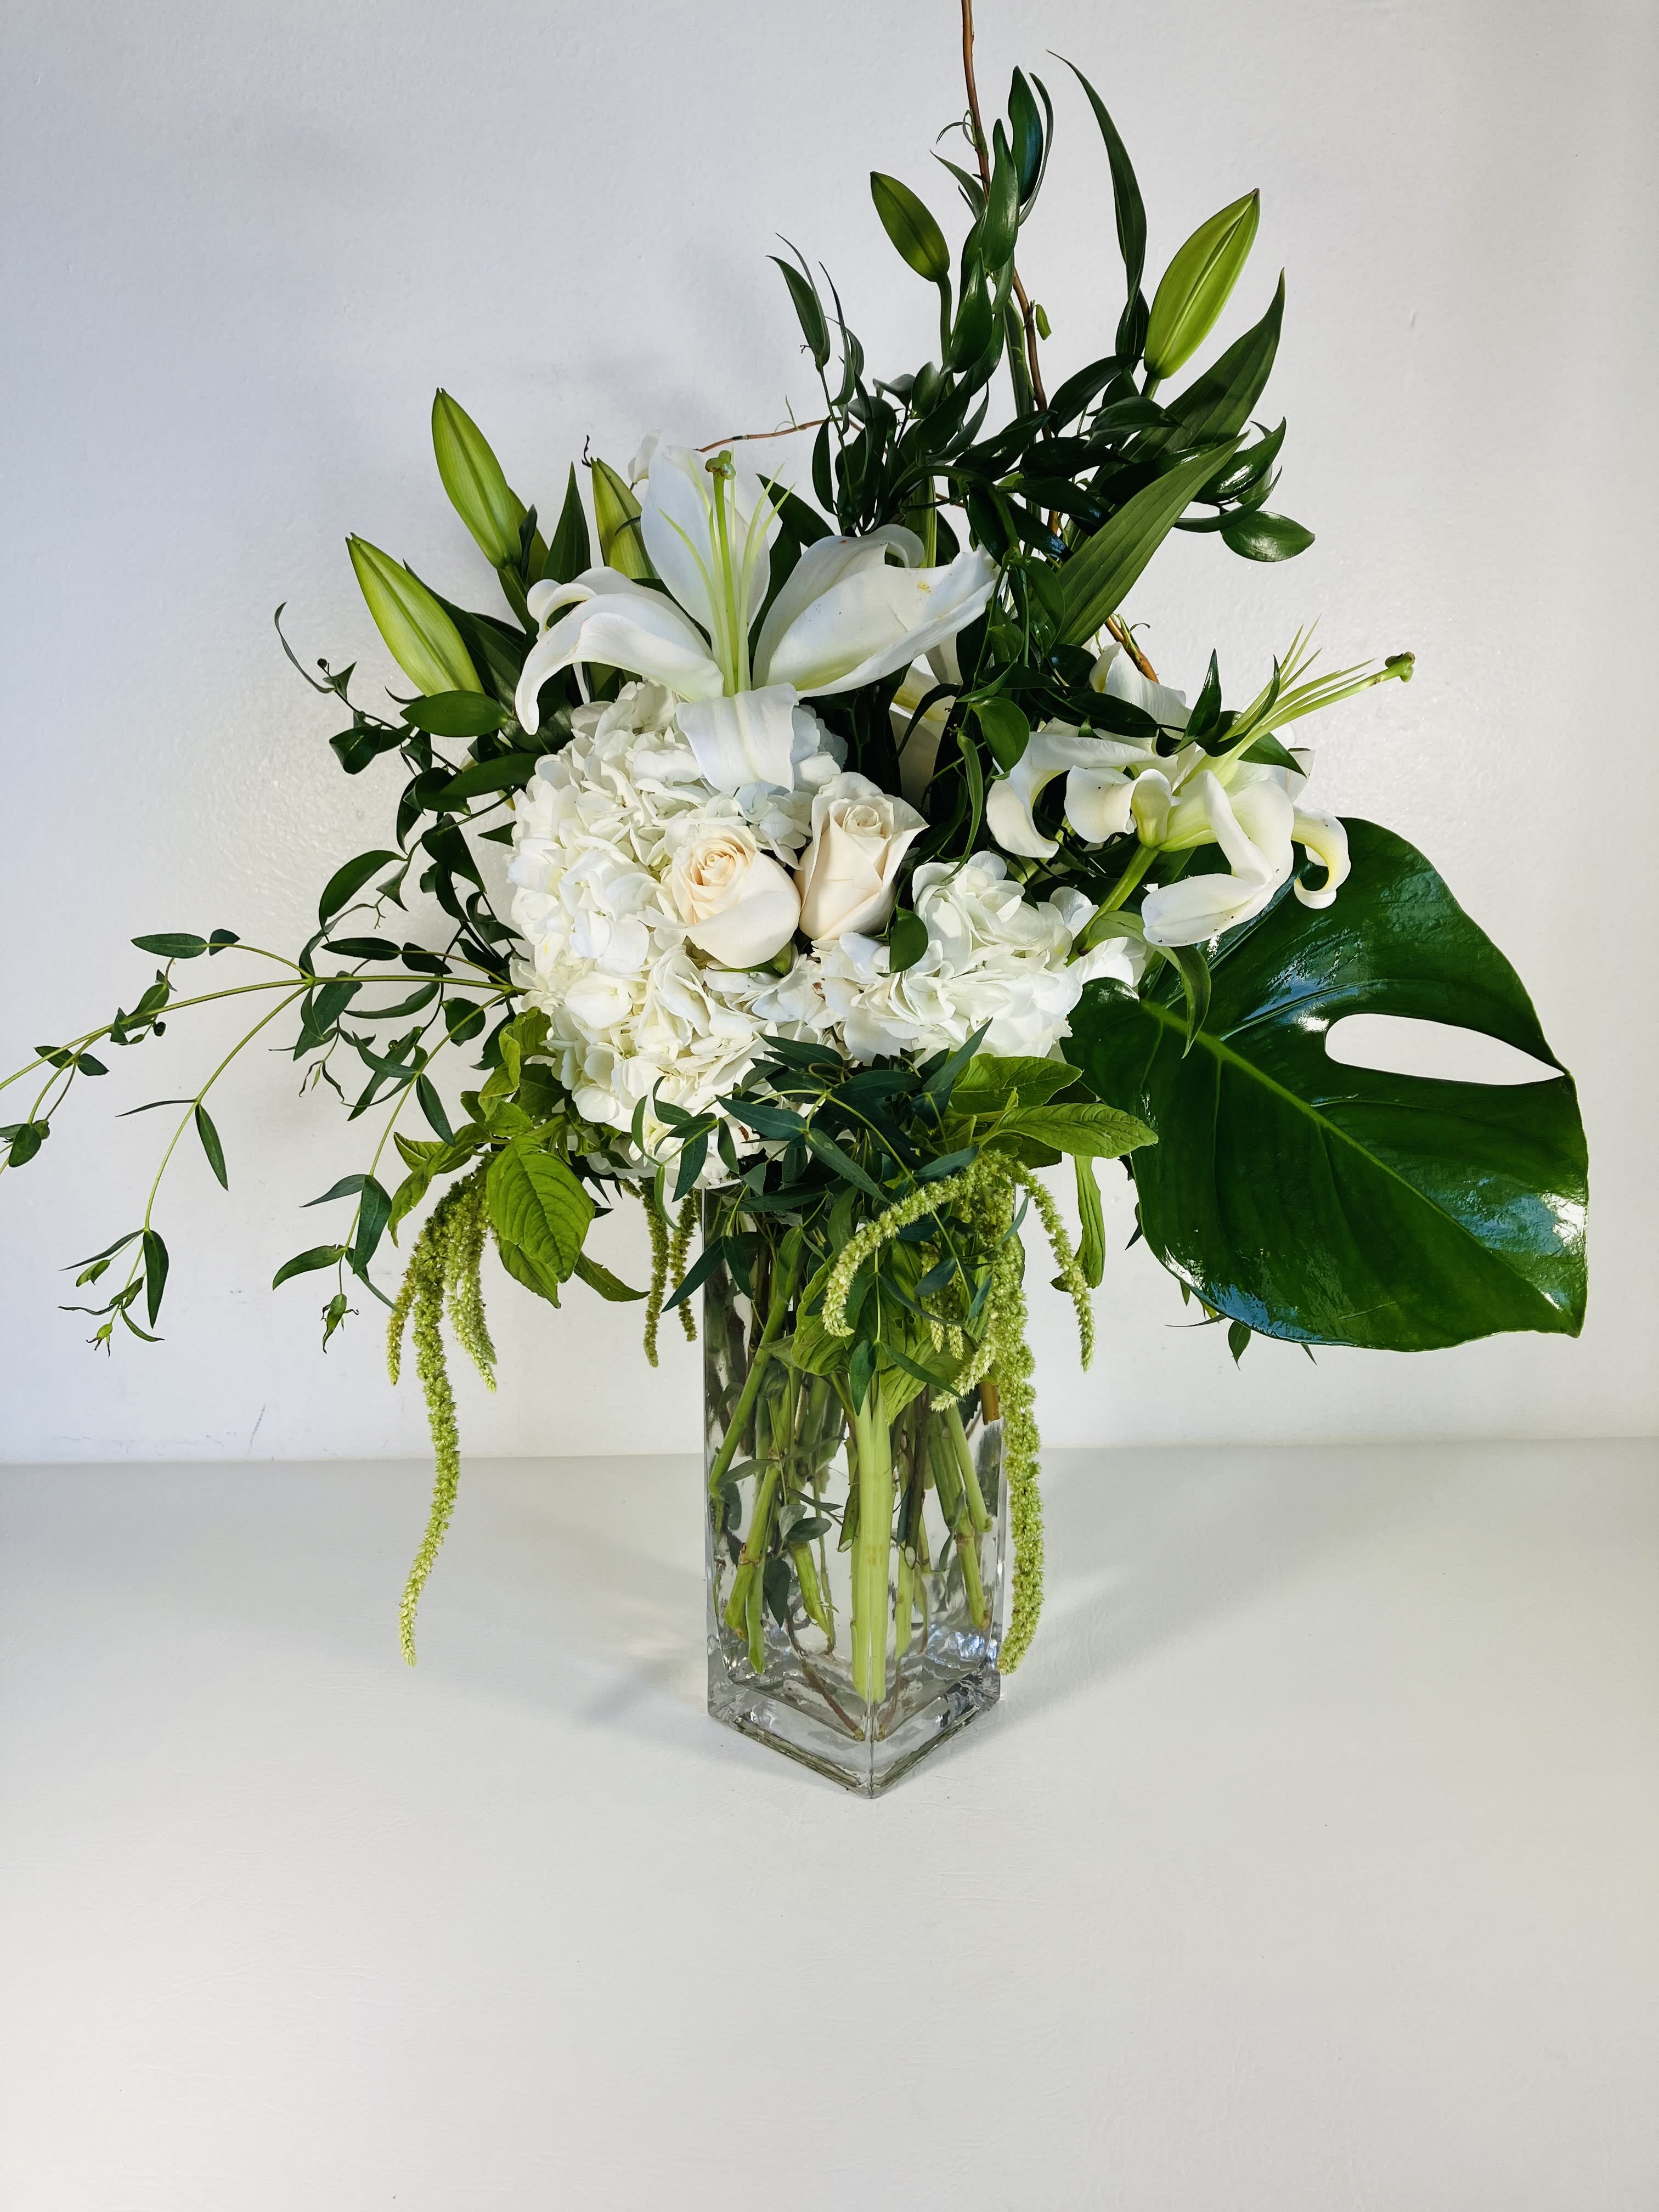 Lovely Lillies - Lillies hold great value to the world - throughout culture and literature they remain not only lovely but influential. This arrangement encompasses timeless beauty with prominent white lilies, white hydrangea, and italian ruscus. 